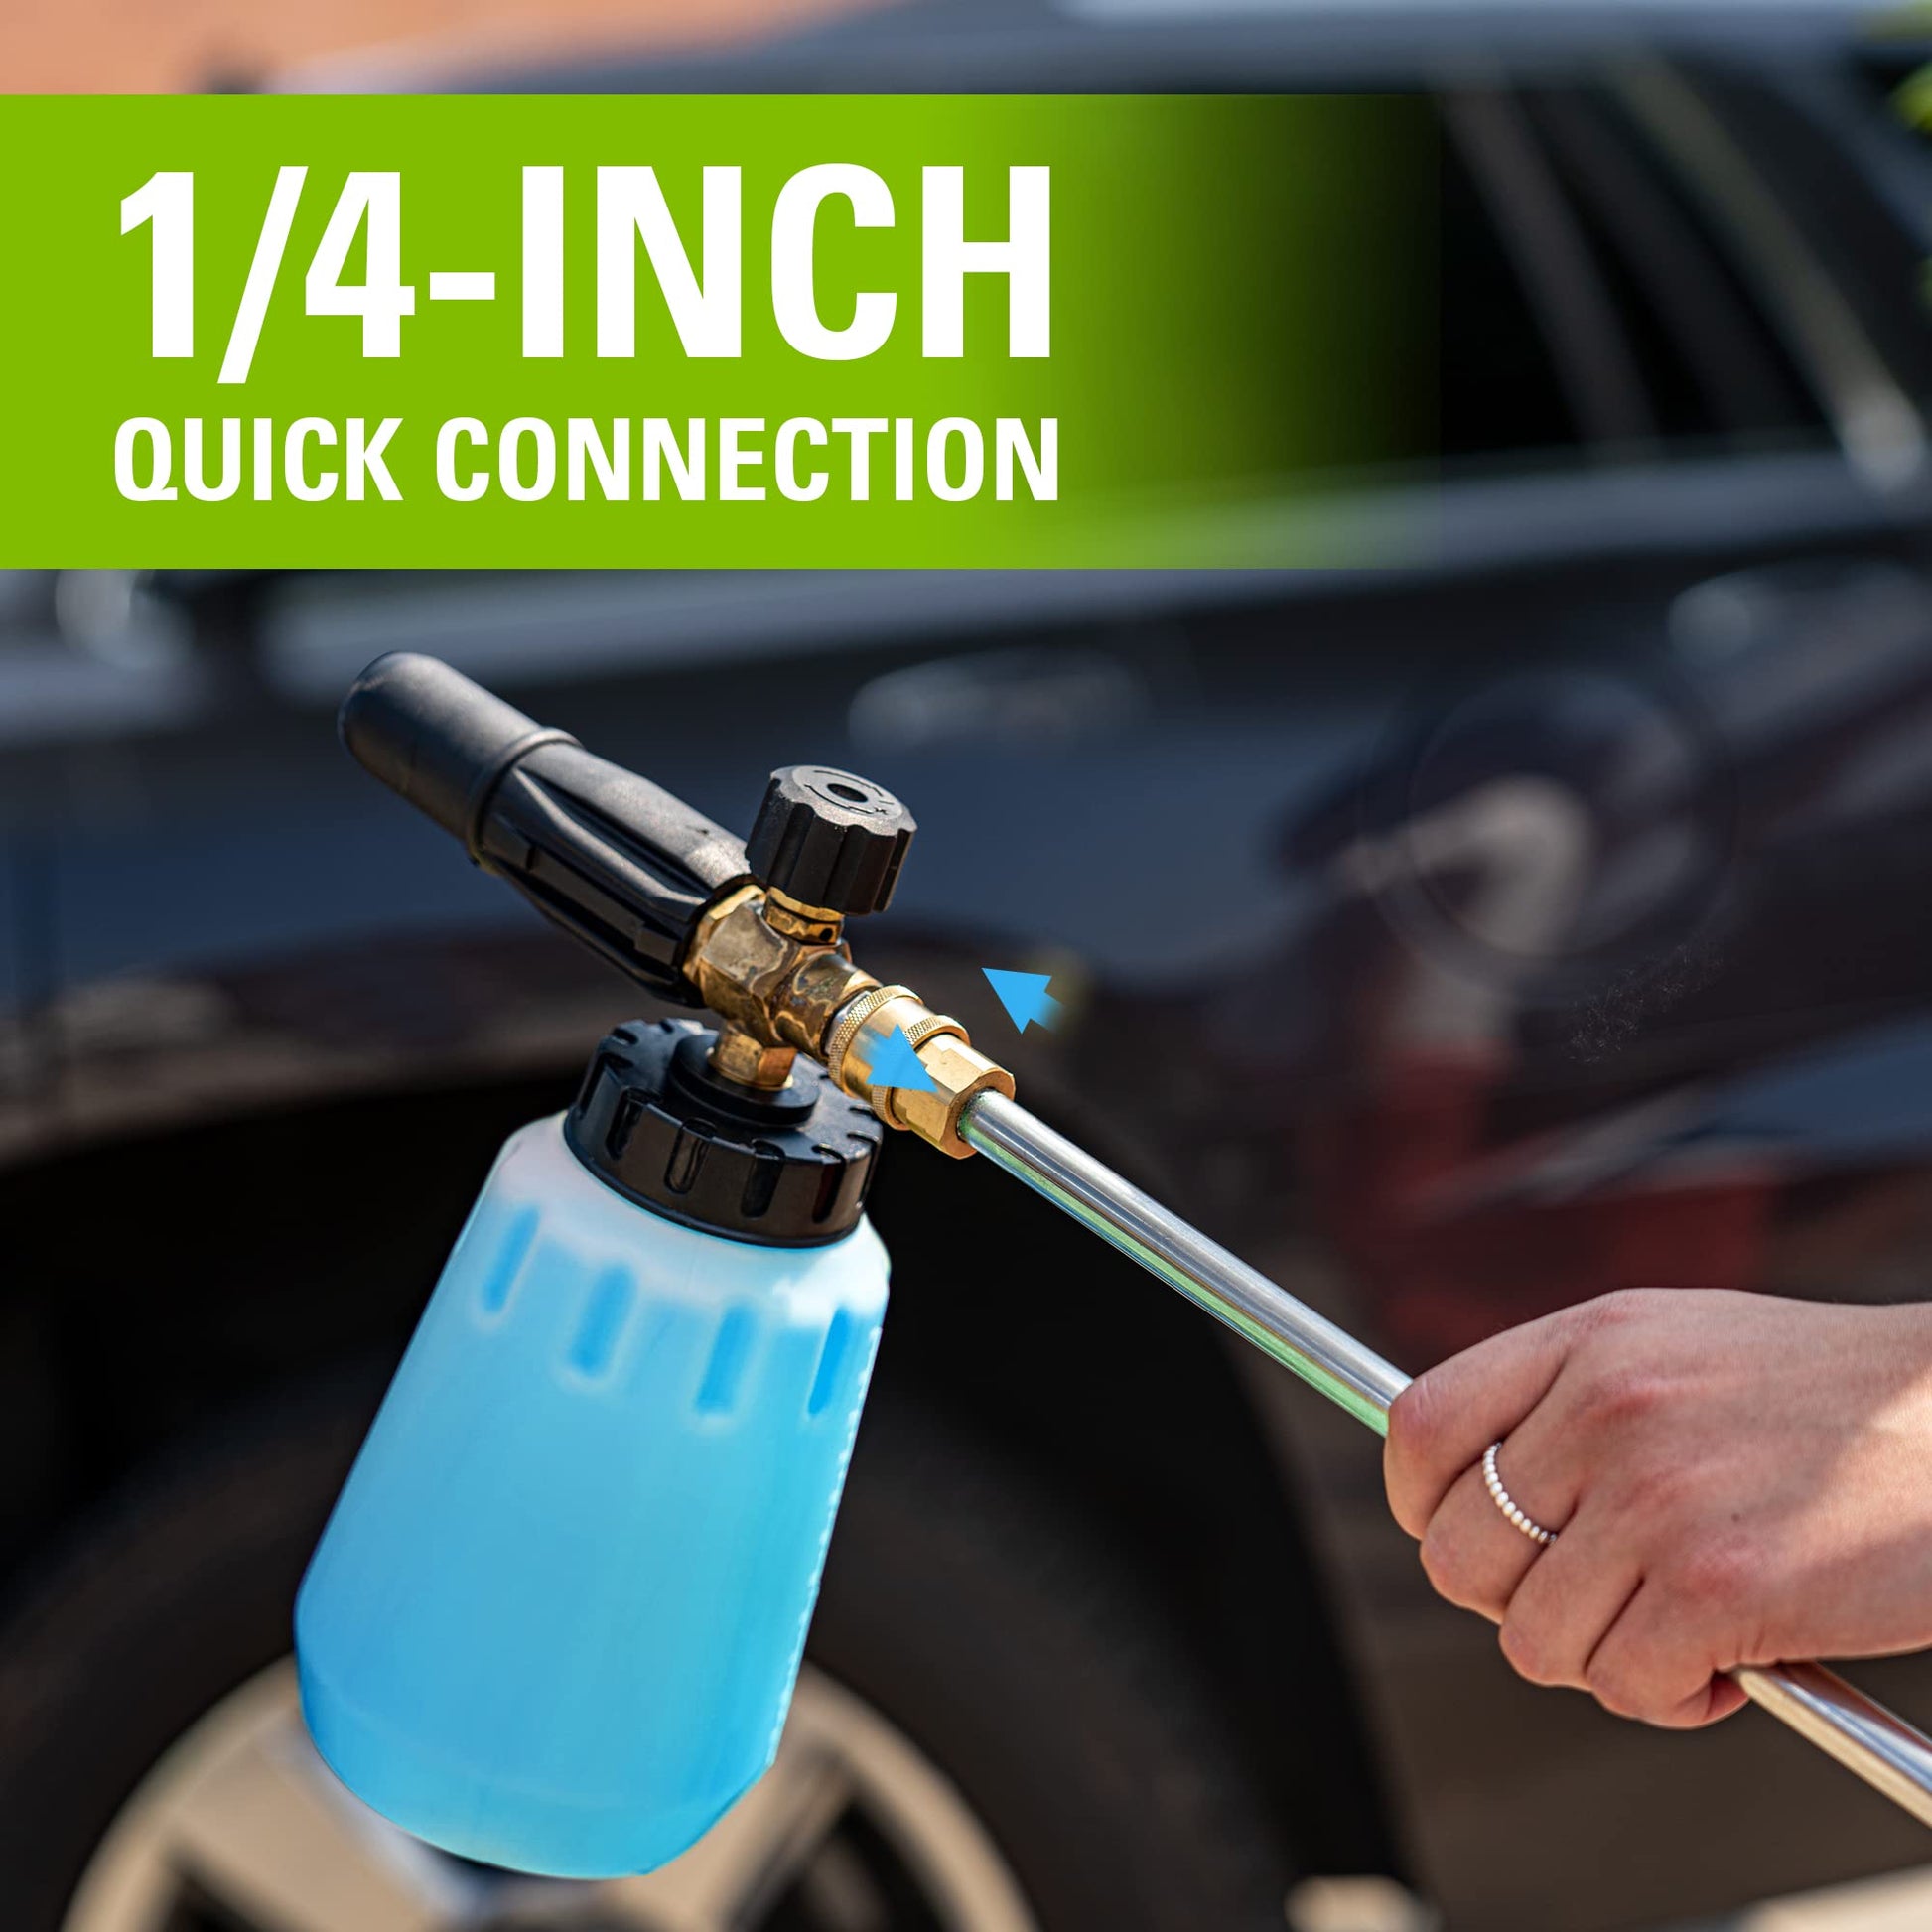 High Pressure Washer Foam Gun 3/8 inch Connector Car Washer Tool for Pressure Power Washers,with 5 Pressure Washer Nozzles, Other